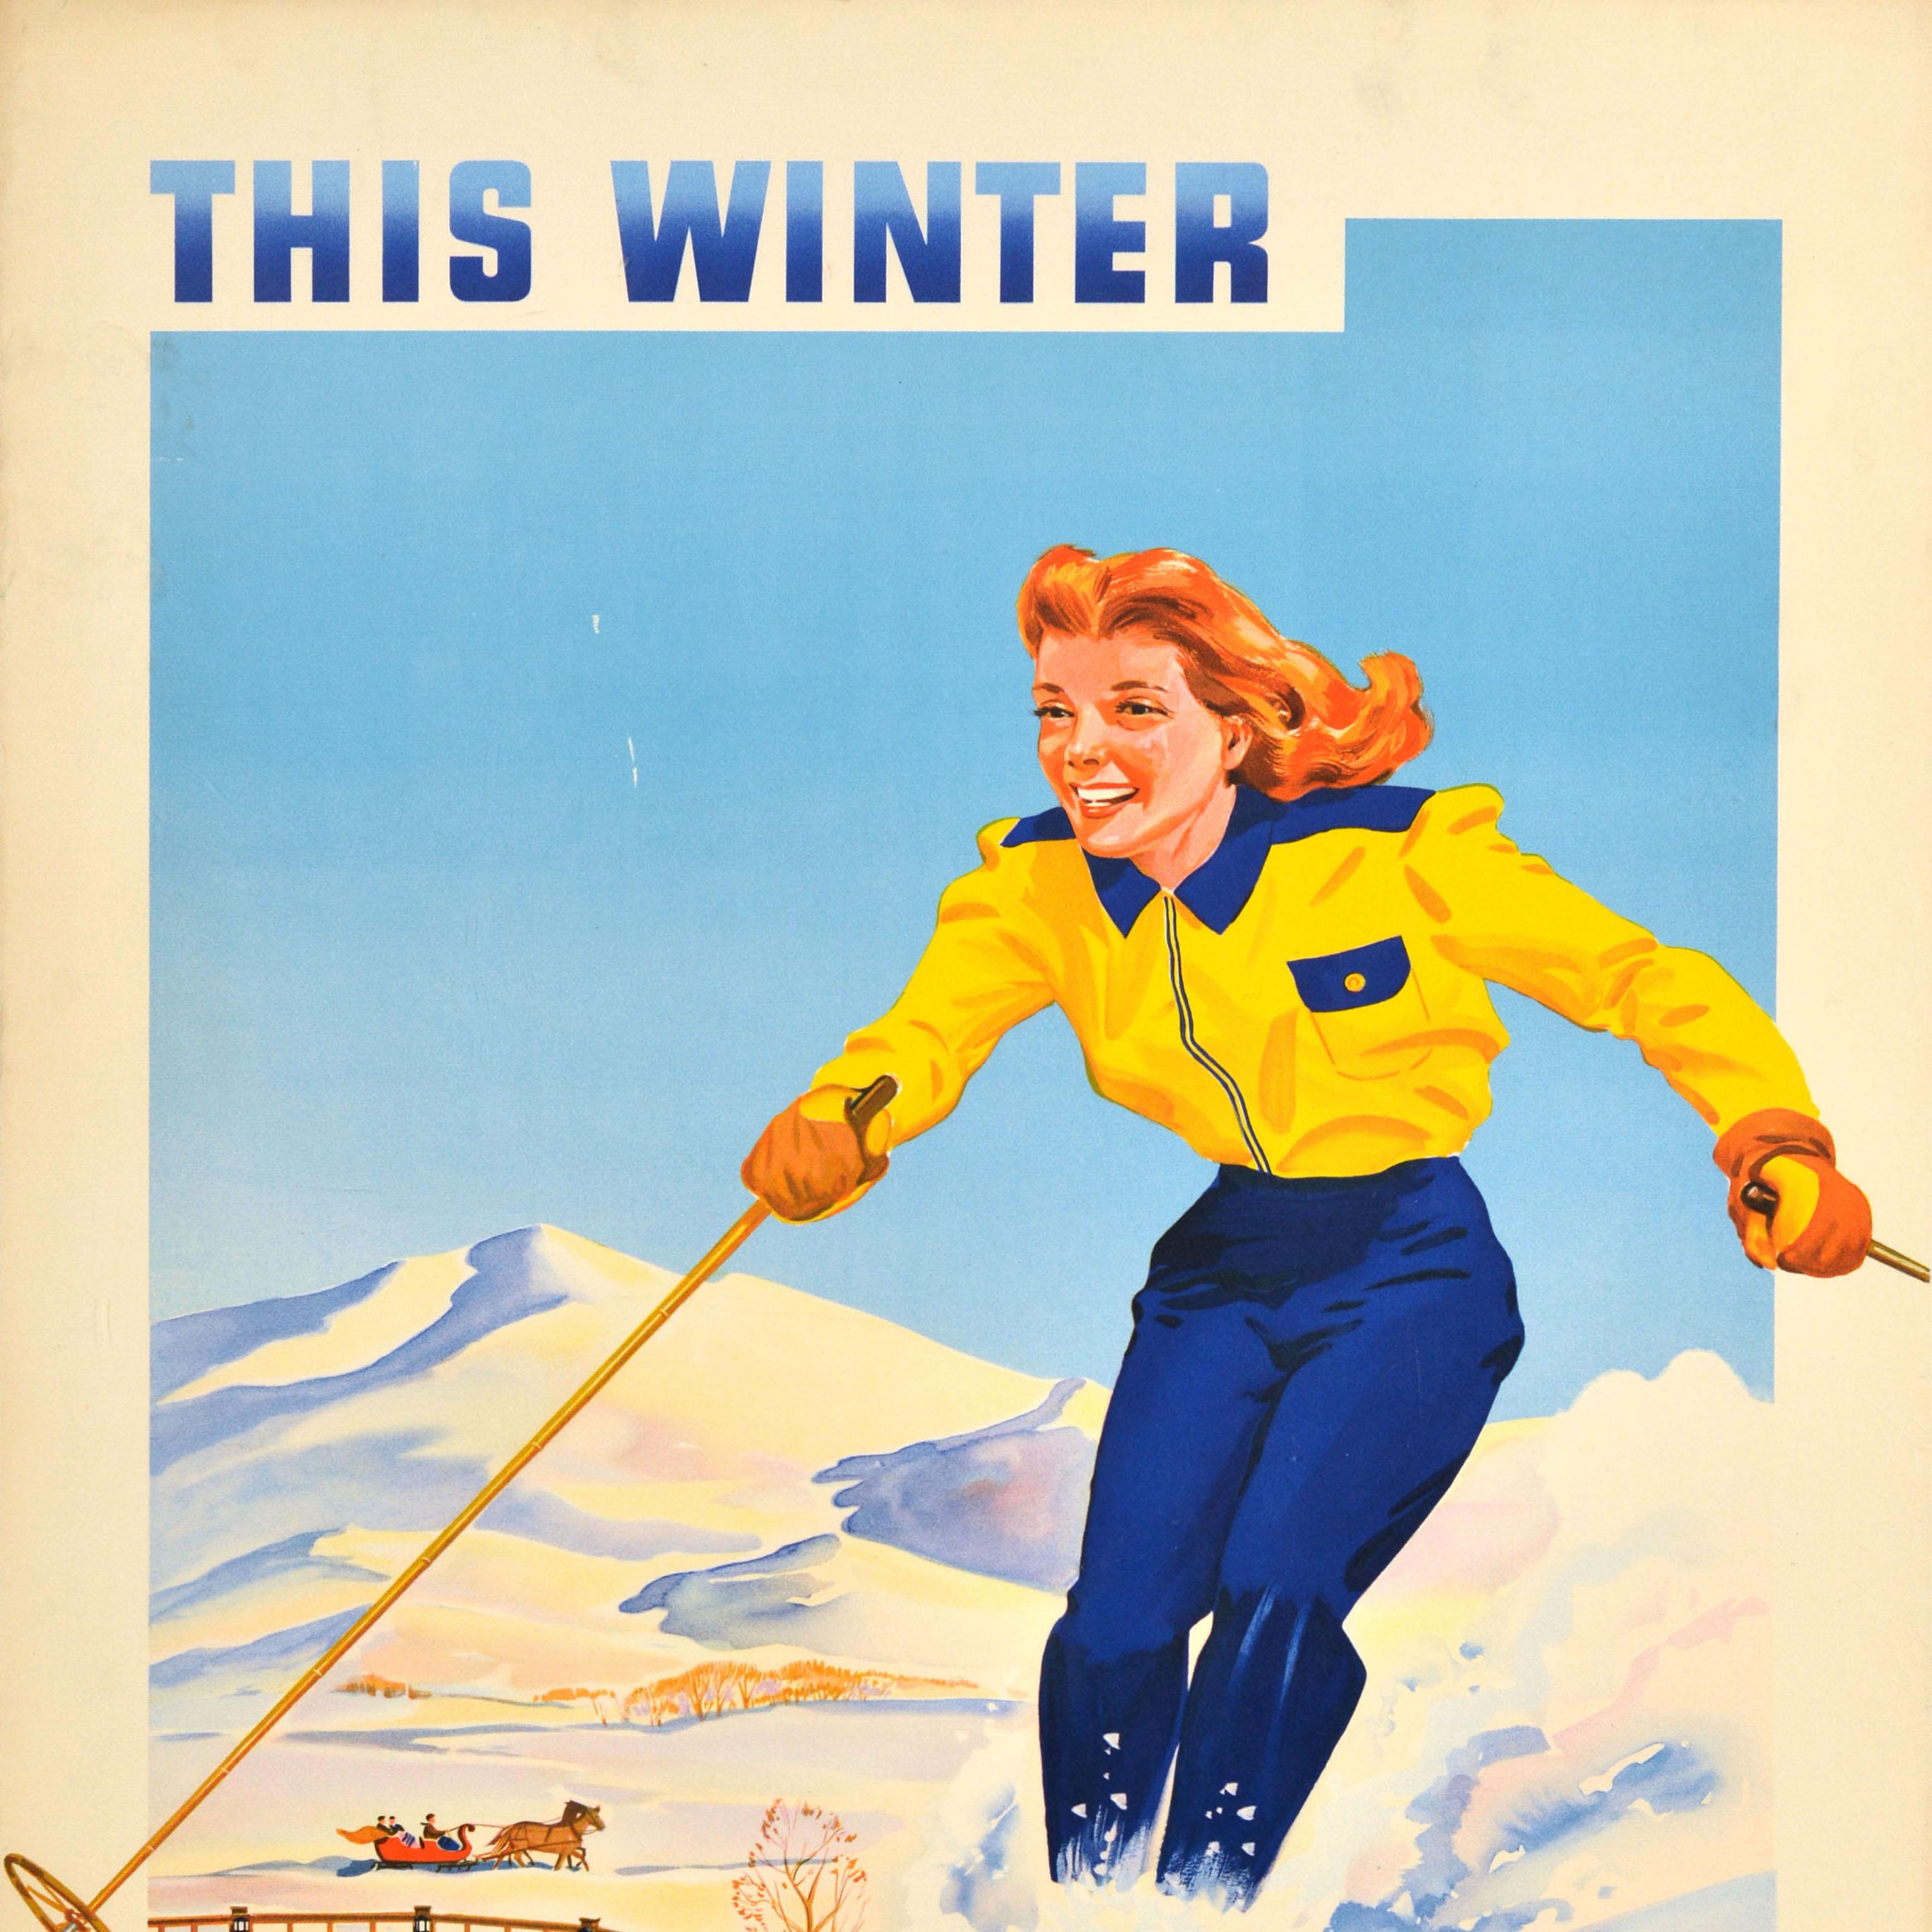 Original vintage winter sports travel poster - This Winter Sun Valley - featuring a great image of a smiling lady in a yellow and blue ski suit skiing down a snowy slope at speed with people enjoying swimming in an outdoor heated pool and riding a